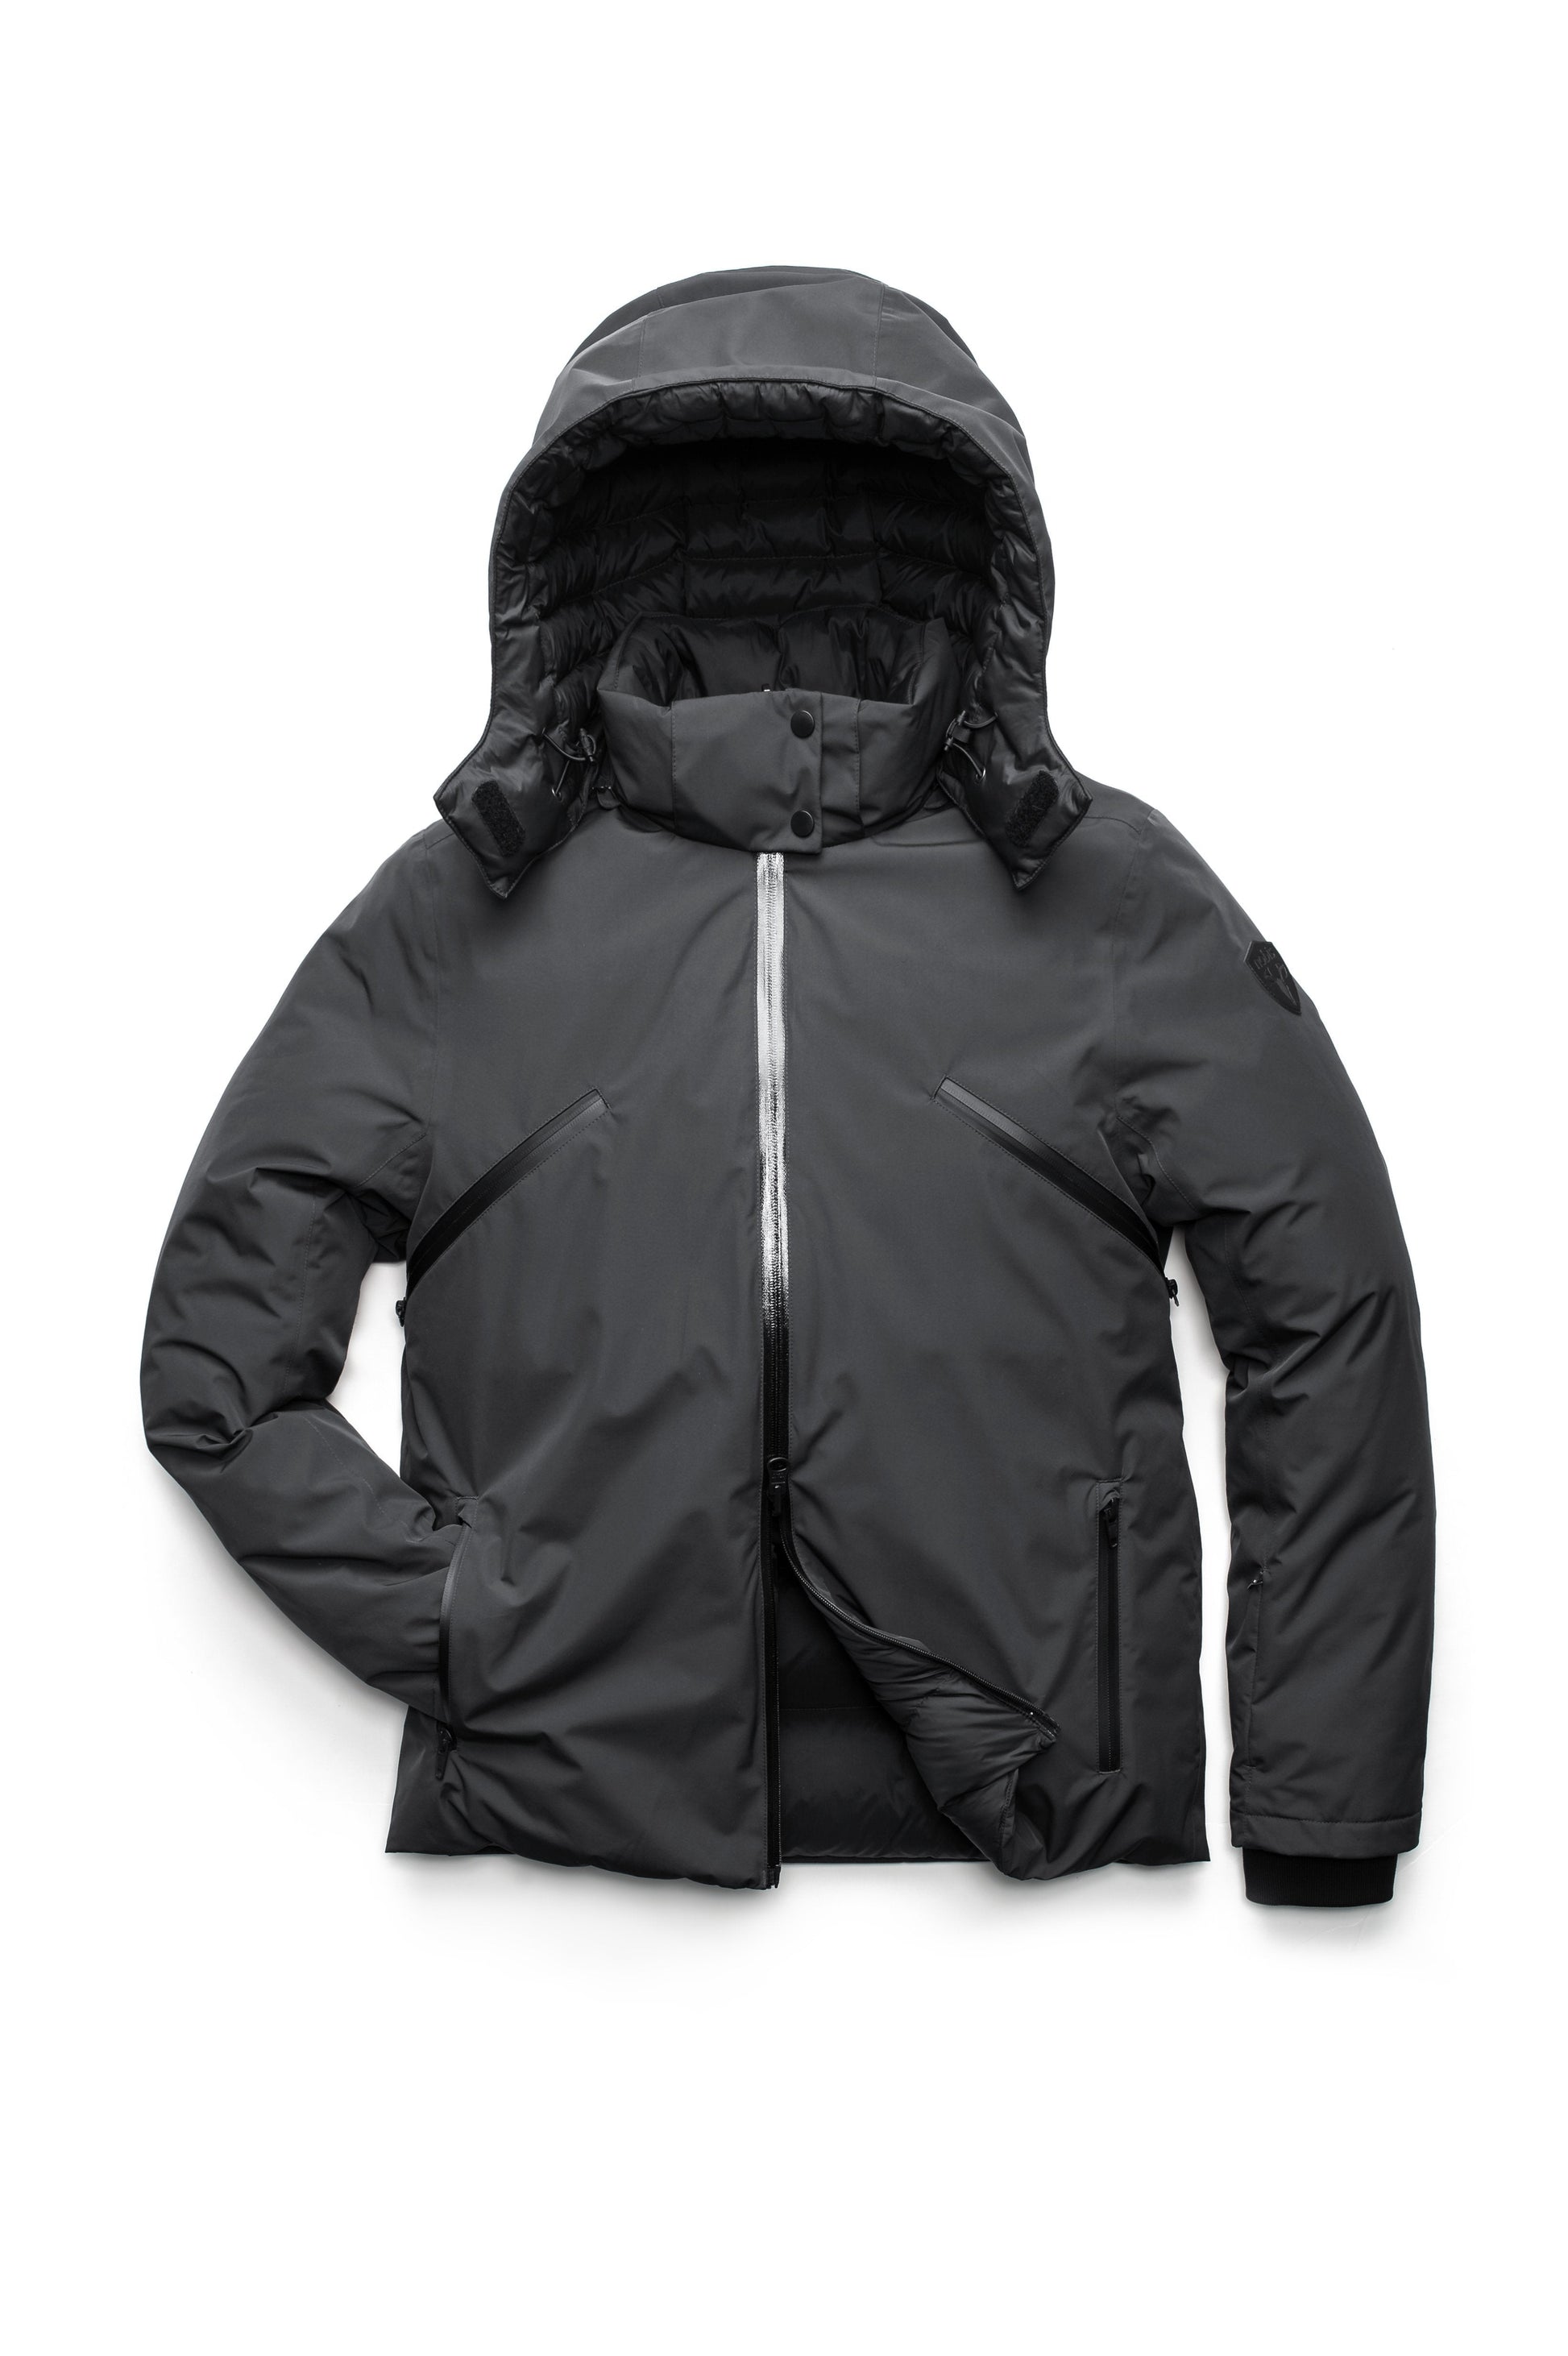 Hip length, reversible men's down filled jacket with removable hood in Black